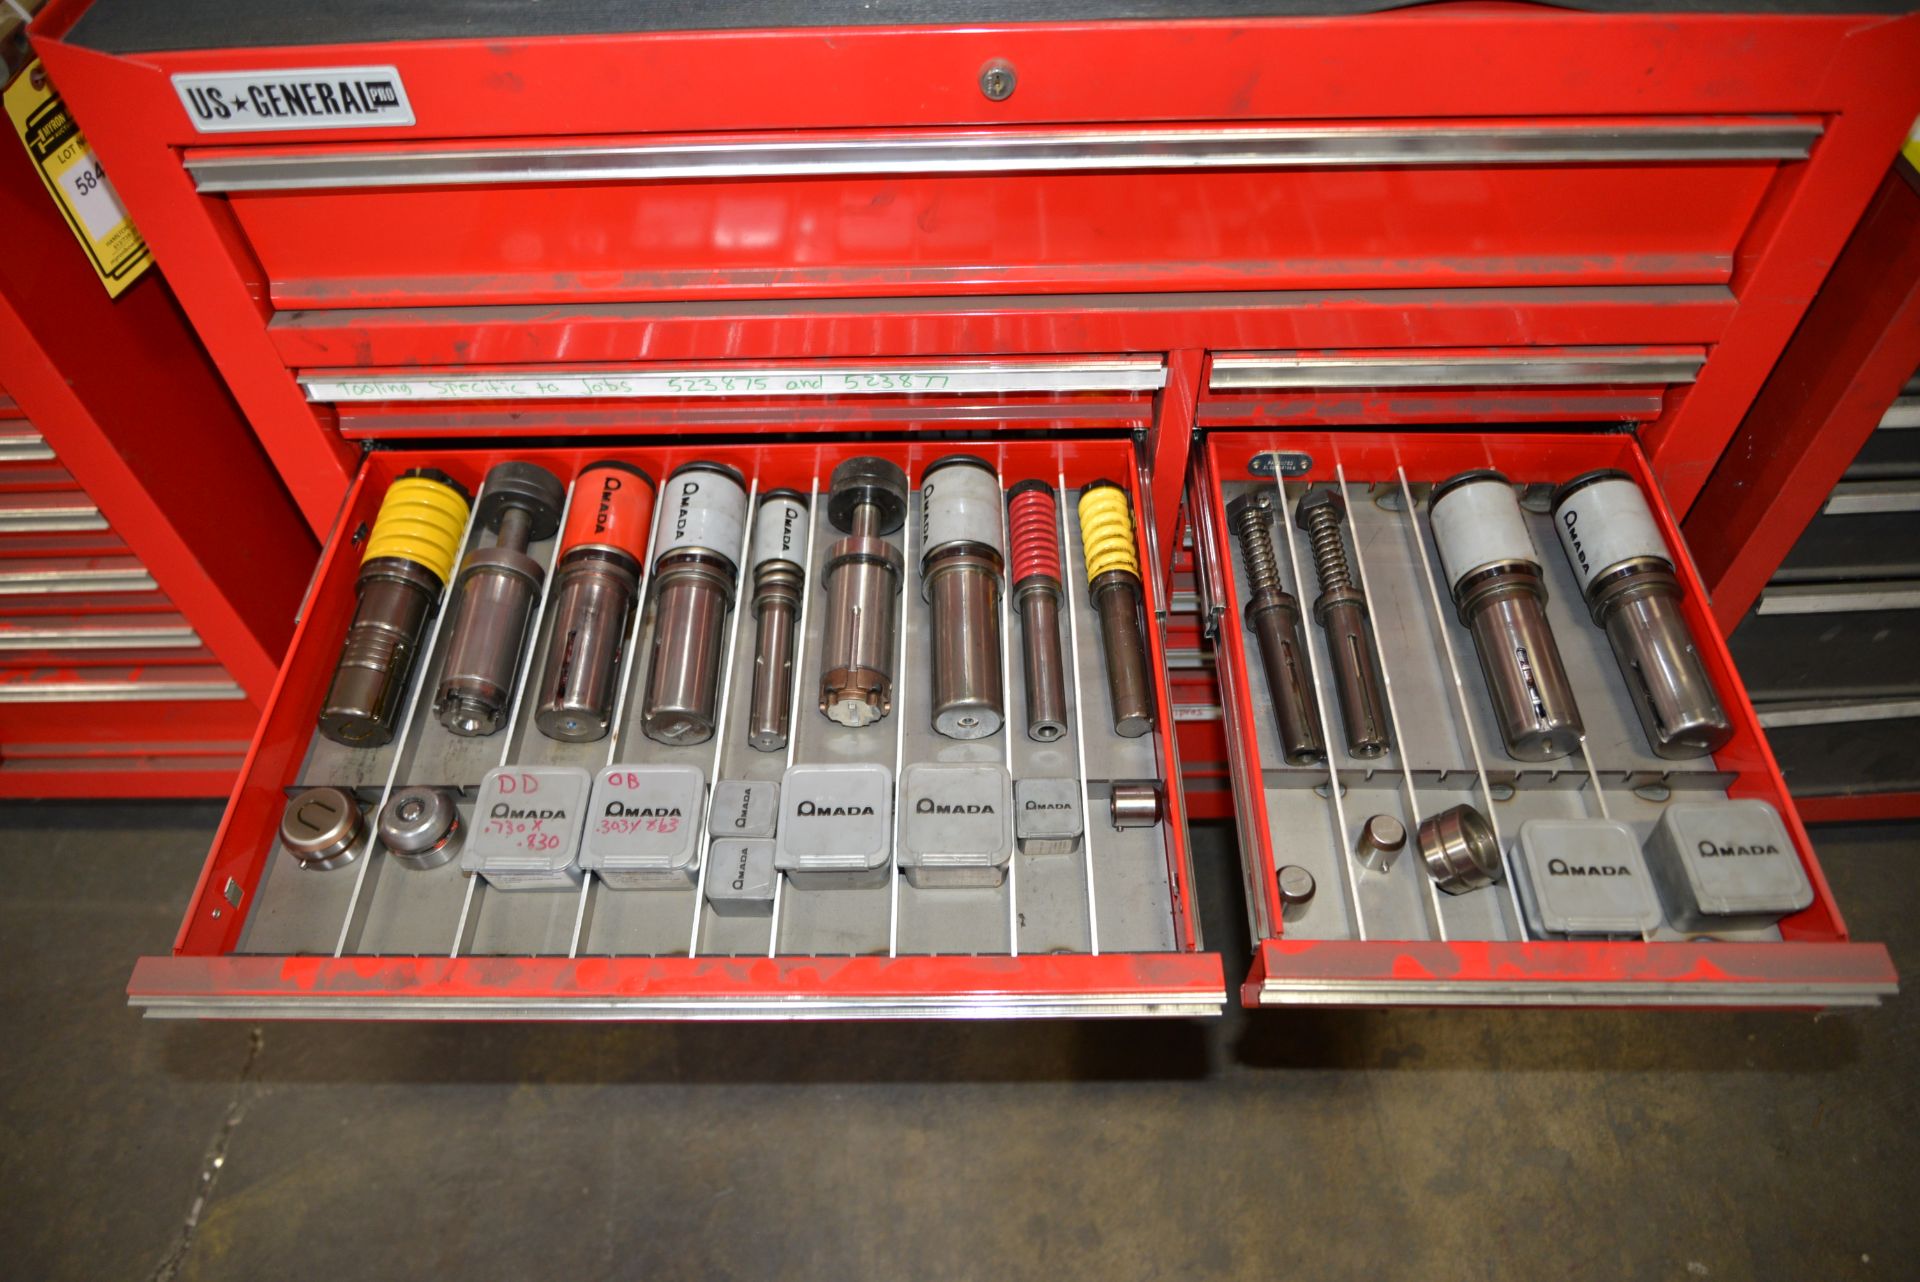 US GENERAL TOOL CHEST FULL OF AMADA TOOLING - Image 4 of 8